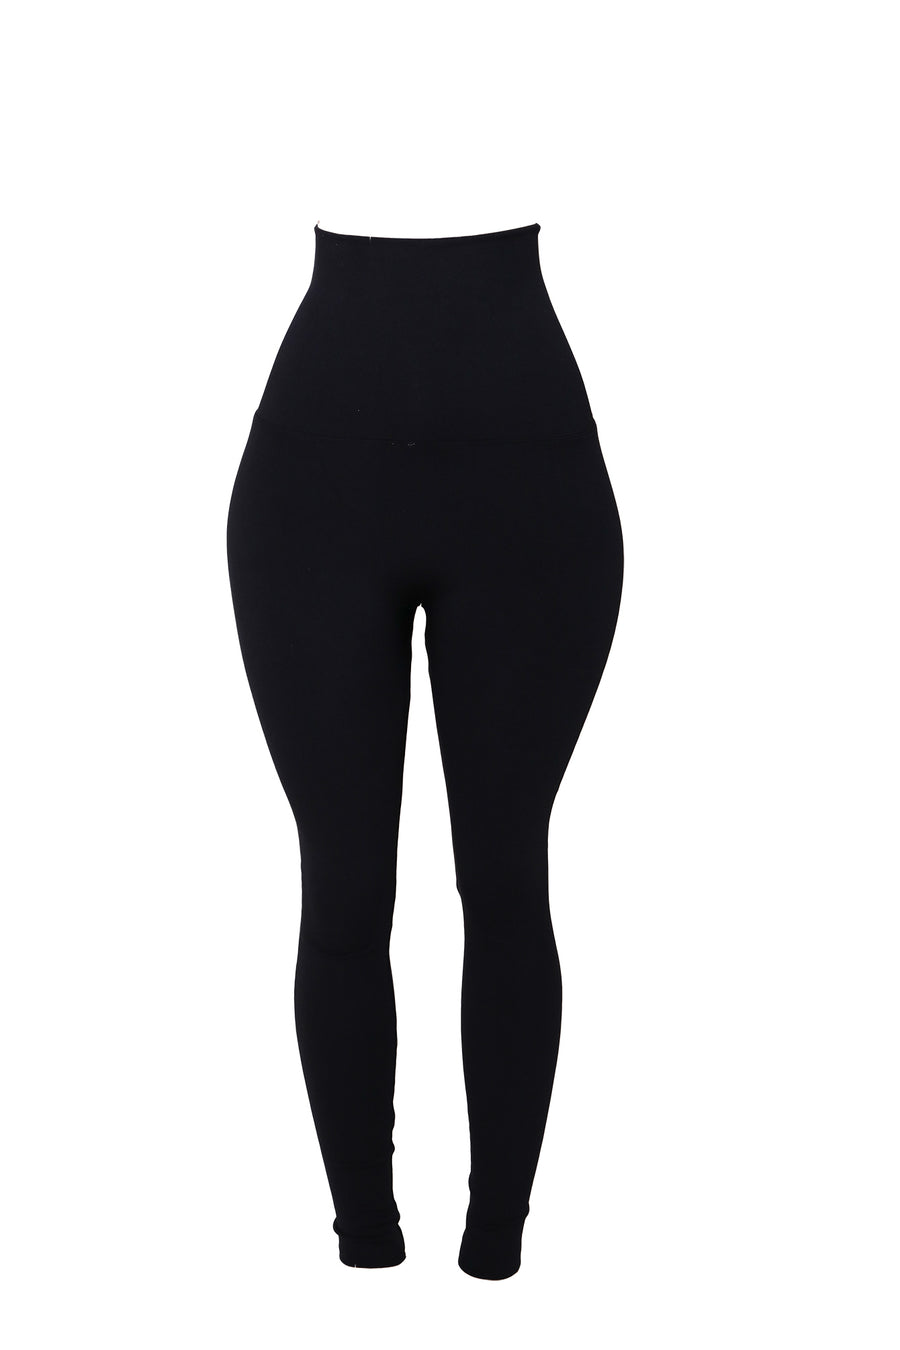 The Black Yoga Tummy Control Legging fits up to PLUS! (choose your size) - Babes And Felines | Specializing in Fashionable Staple Pieces for Every Shape and Size (9294242442)